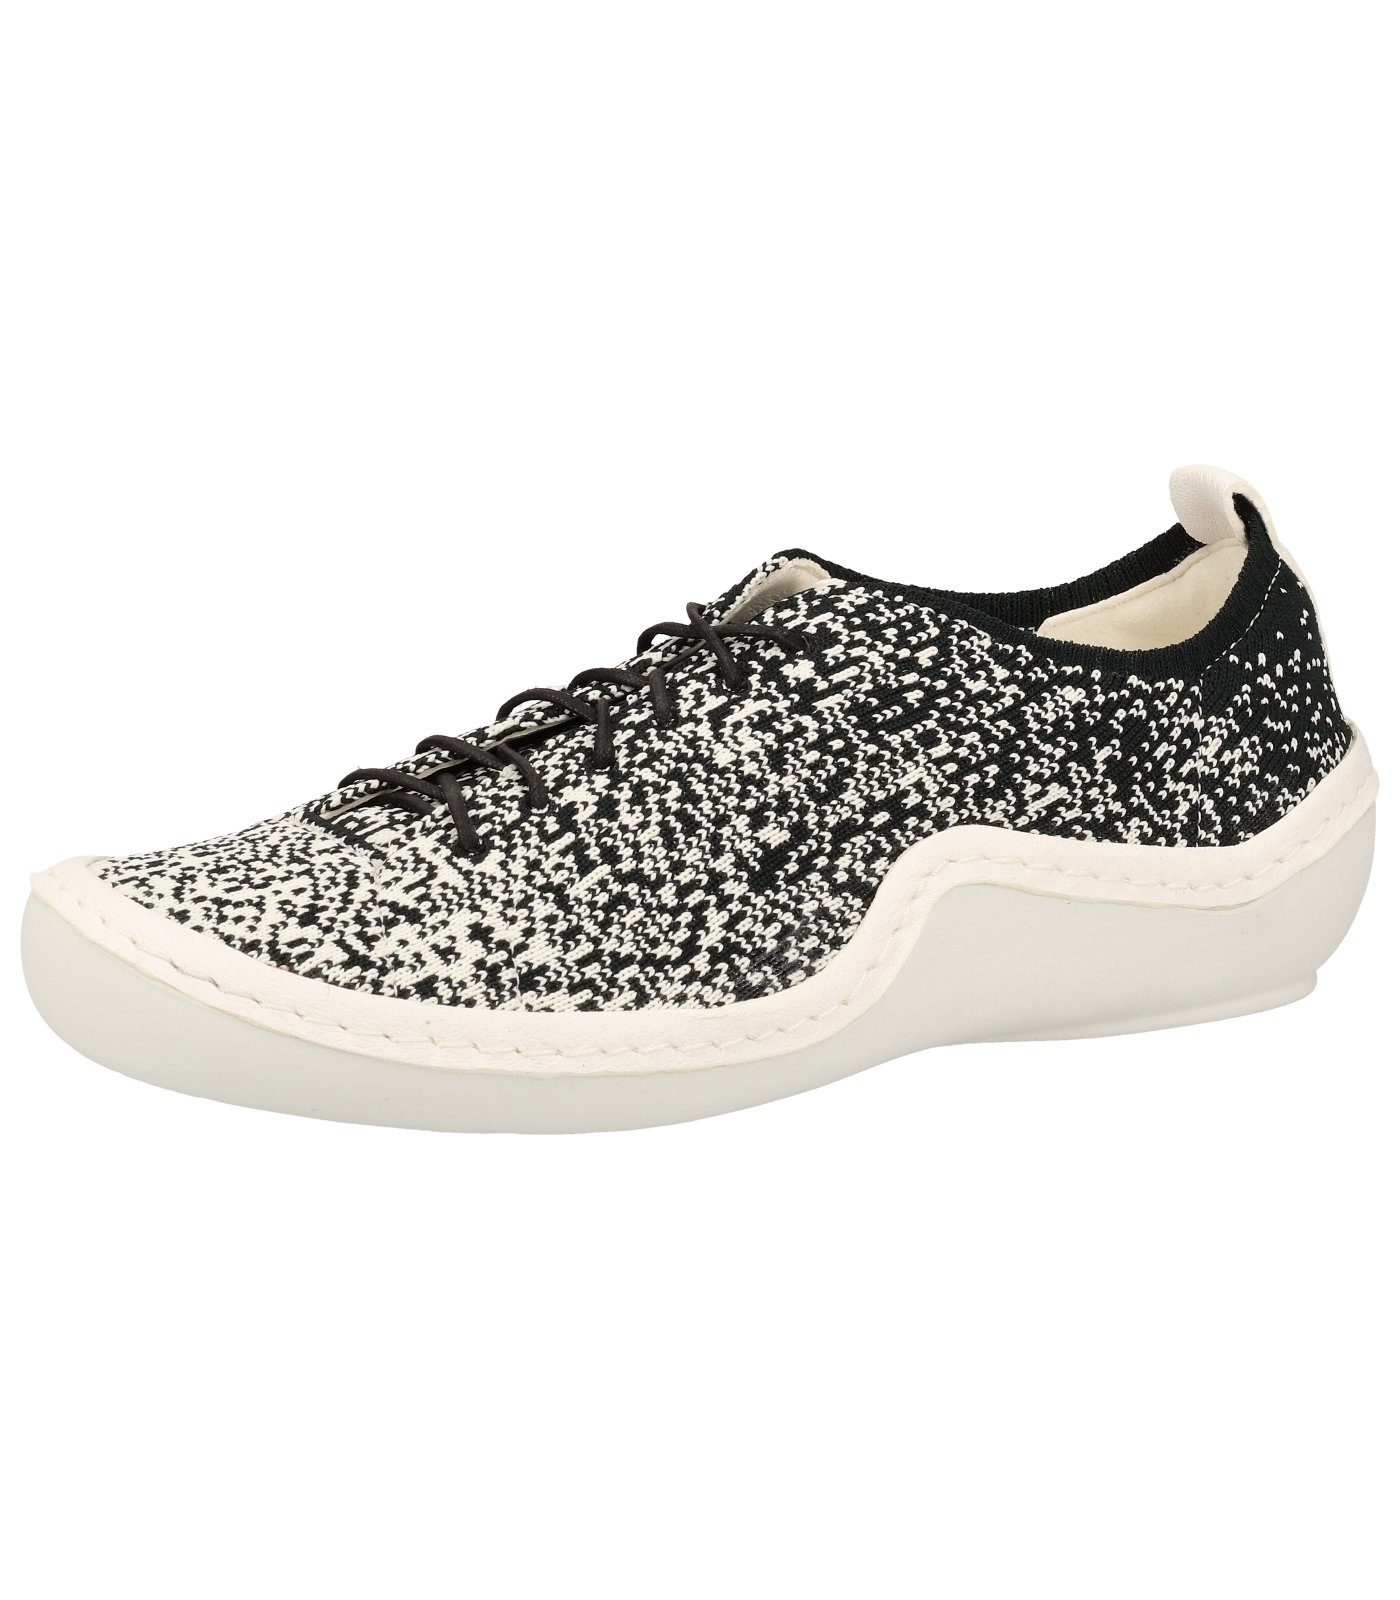 Think! Sneaker recyceltes Polyester Sneaker